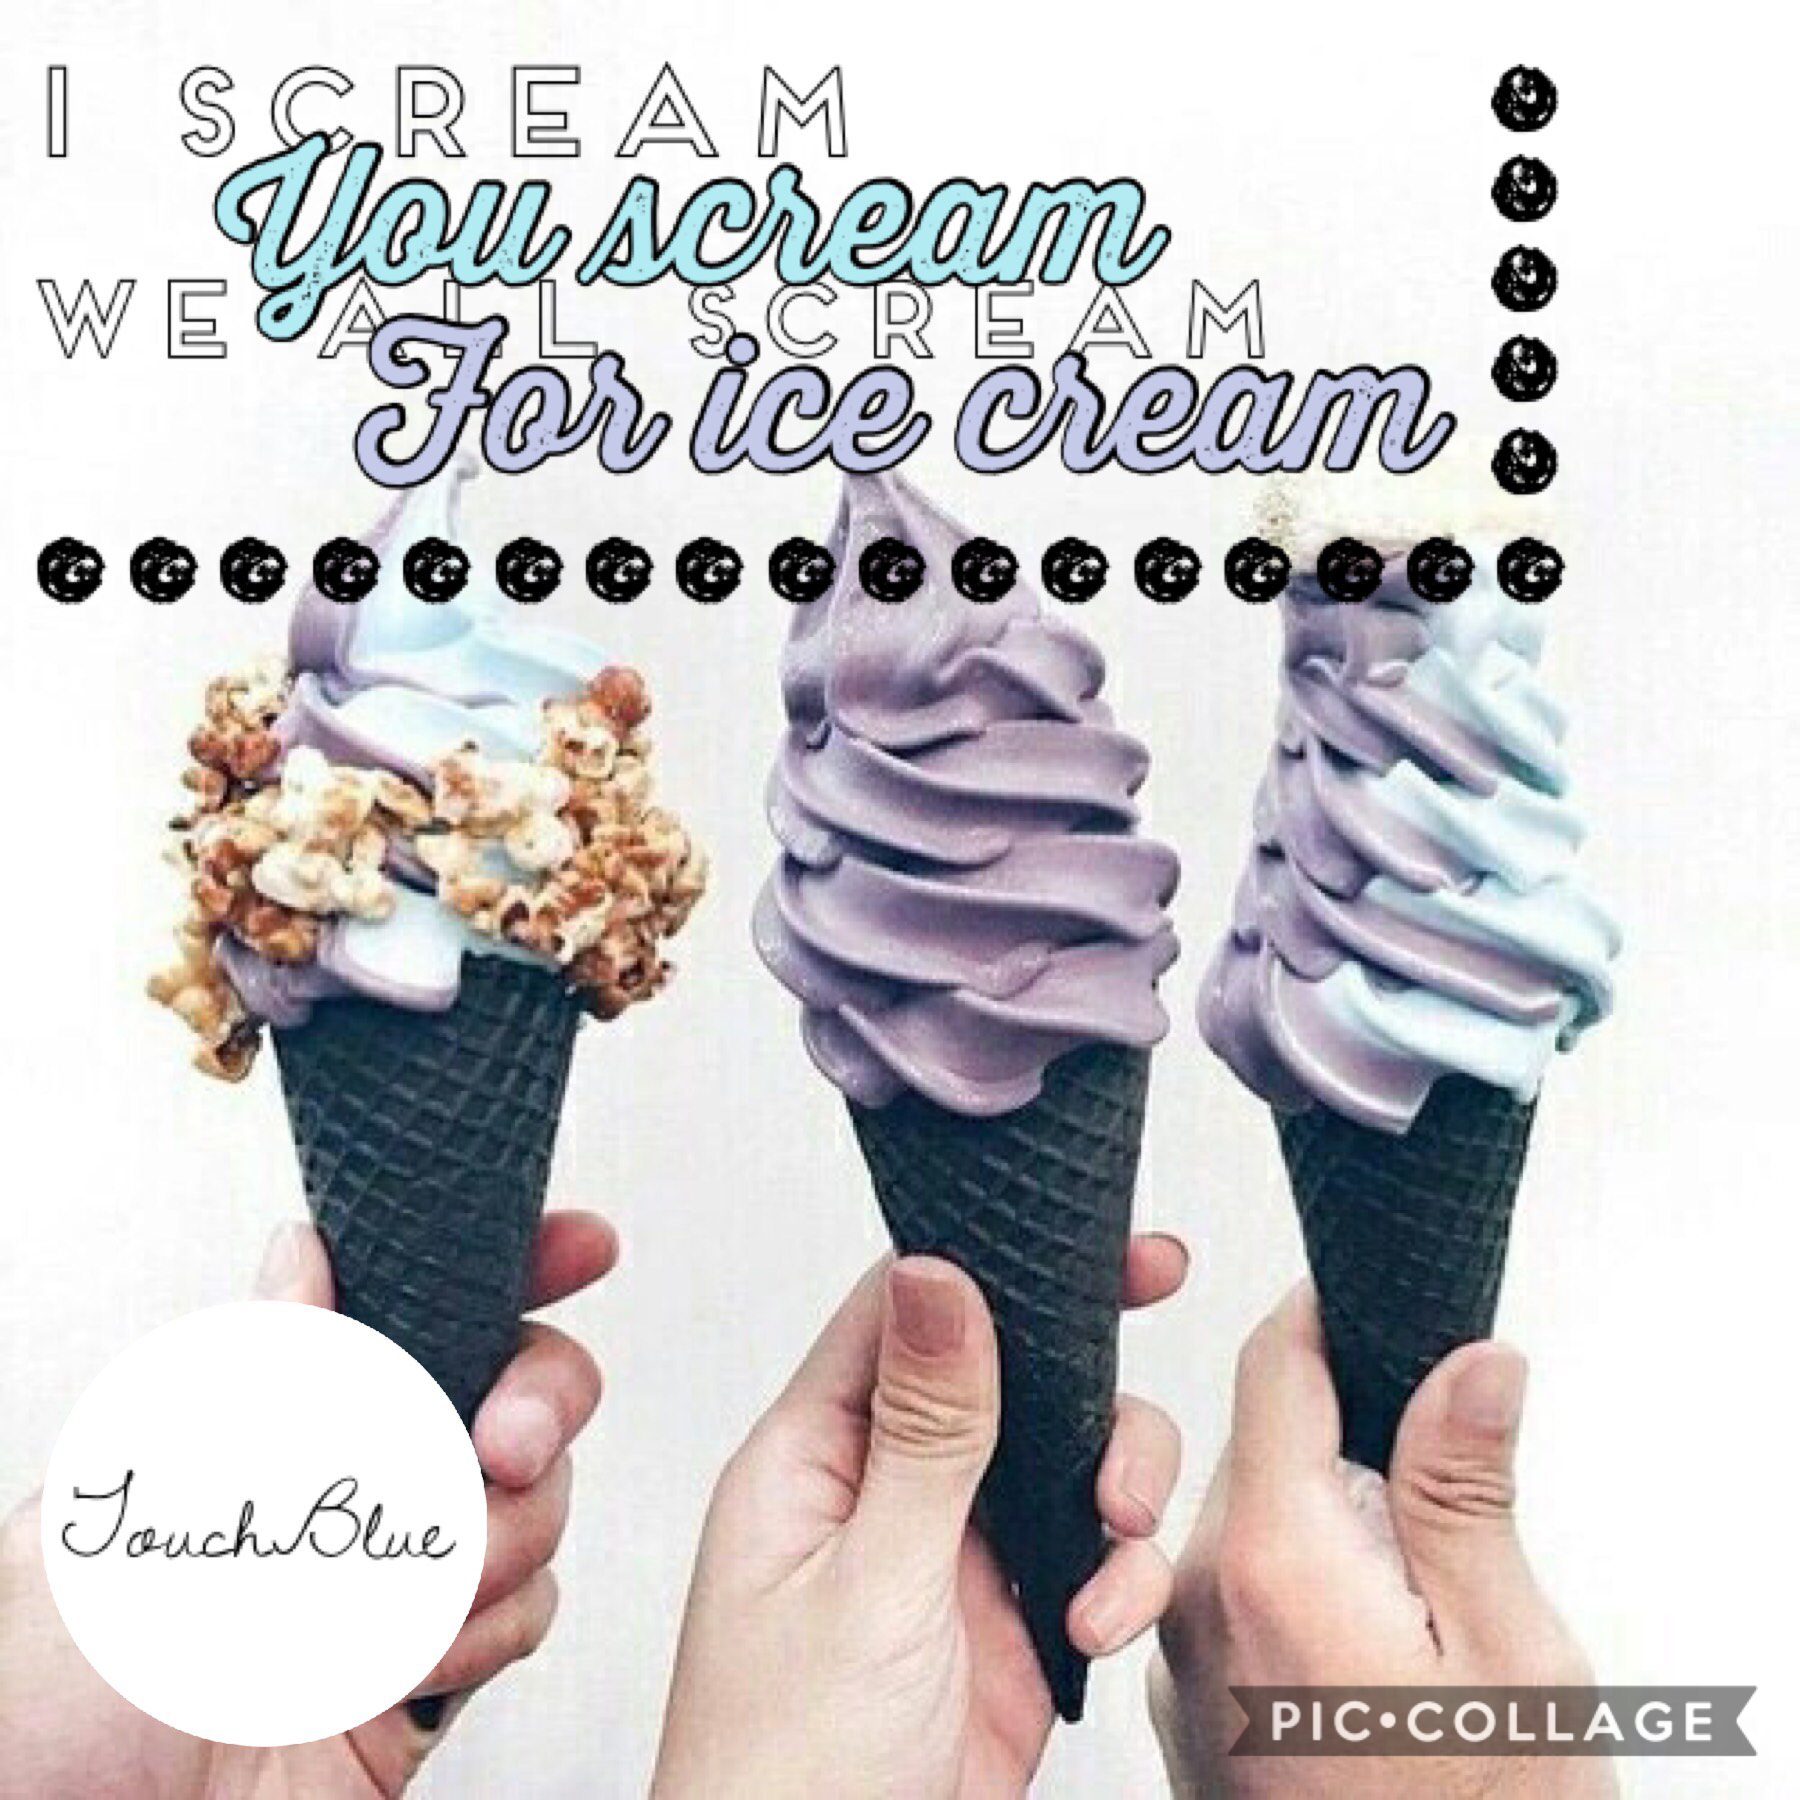 🍦tap🍦
ICE CREAMMM YUM YUM YUM

Haha 😂 

QOTD: What are your summer plans? 
AOTD: Going to a big amusement park (cedar point) and chillin 😎 